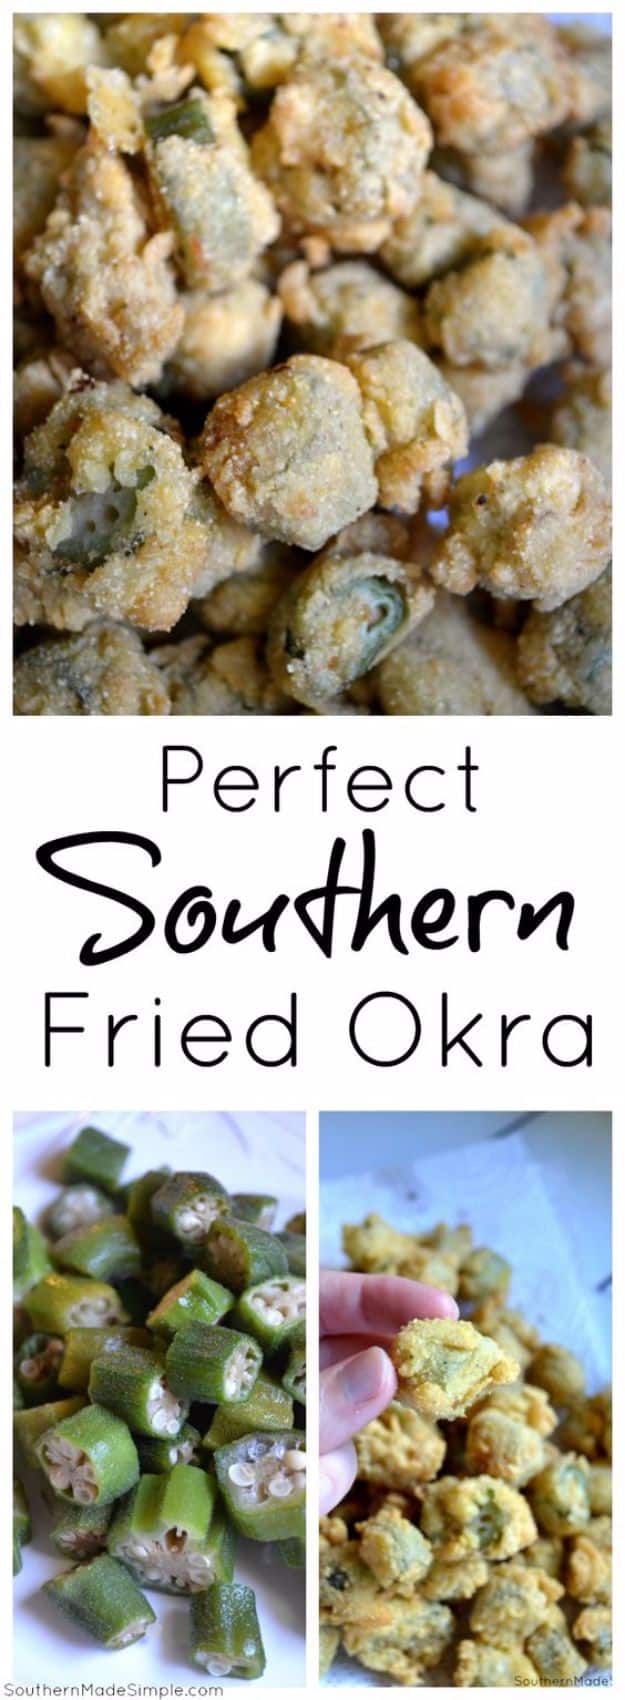 Best Country Cooking Recipes - Perfect Southern Fried Okra - Easy Recipes for Country Food Like Chicken Fried Steak, Fried Green Tomatoes, Southern Gravy, Breads and Biscuits, Casseroles and More - Breakfast, Lunch and Dinner Recipe Ideas for Families and Feeding A Crowd - Step by Step Instructions for Making Homestyle Dips, Snacks, Desserts #recipes